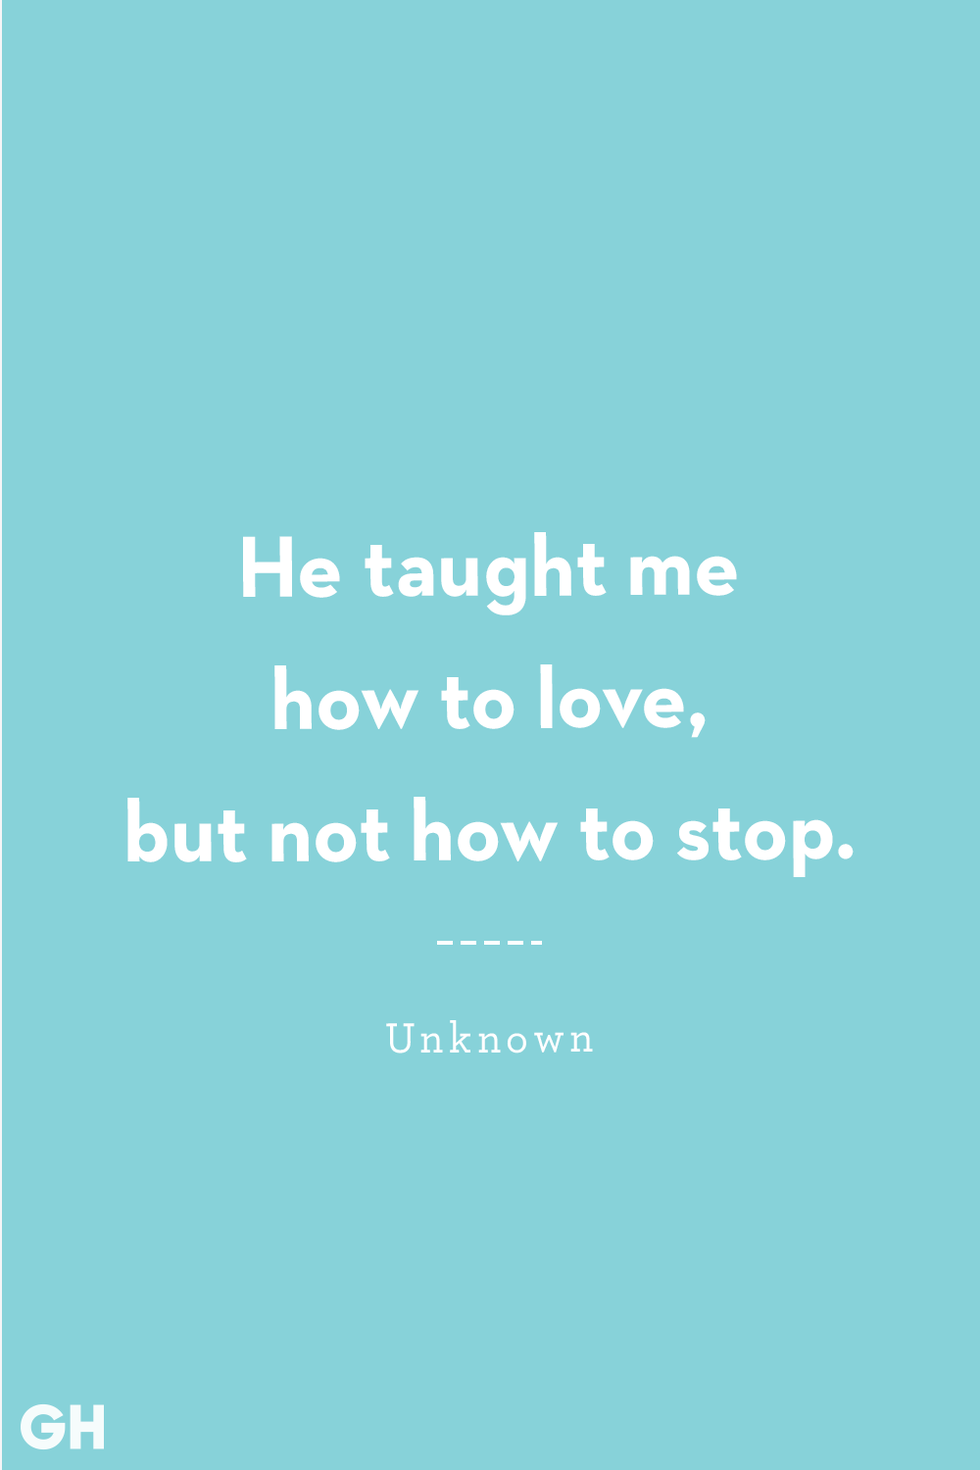 42 Best Sad Quotes And Sayings About Love, Loss And Tough Times